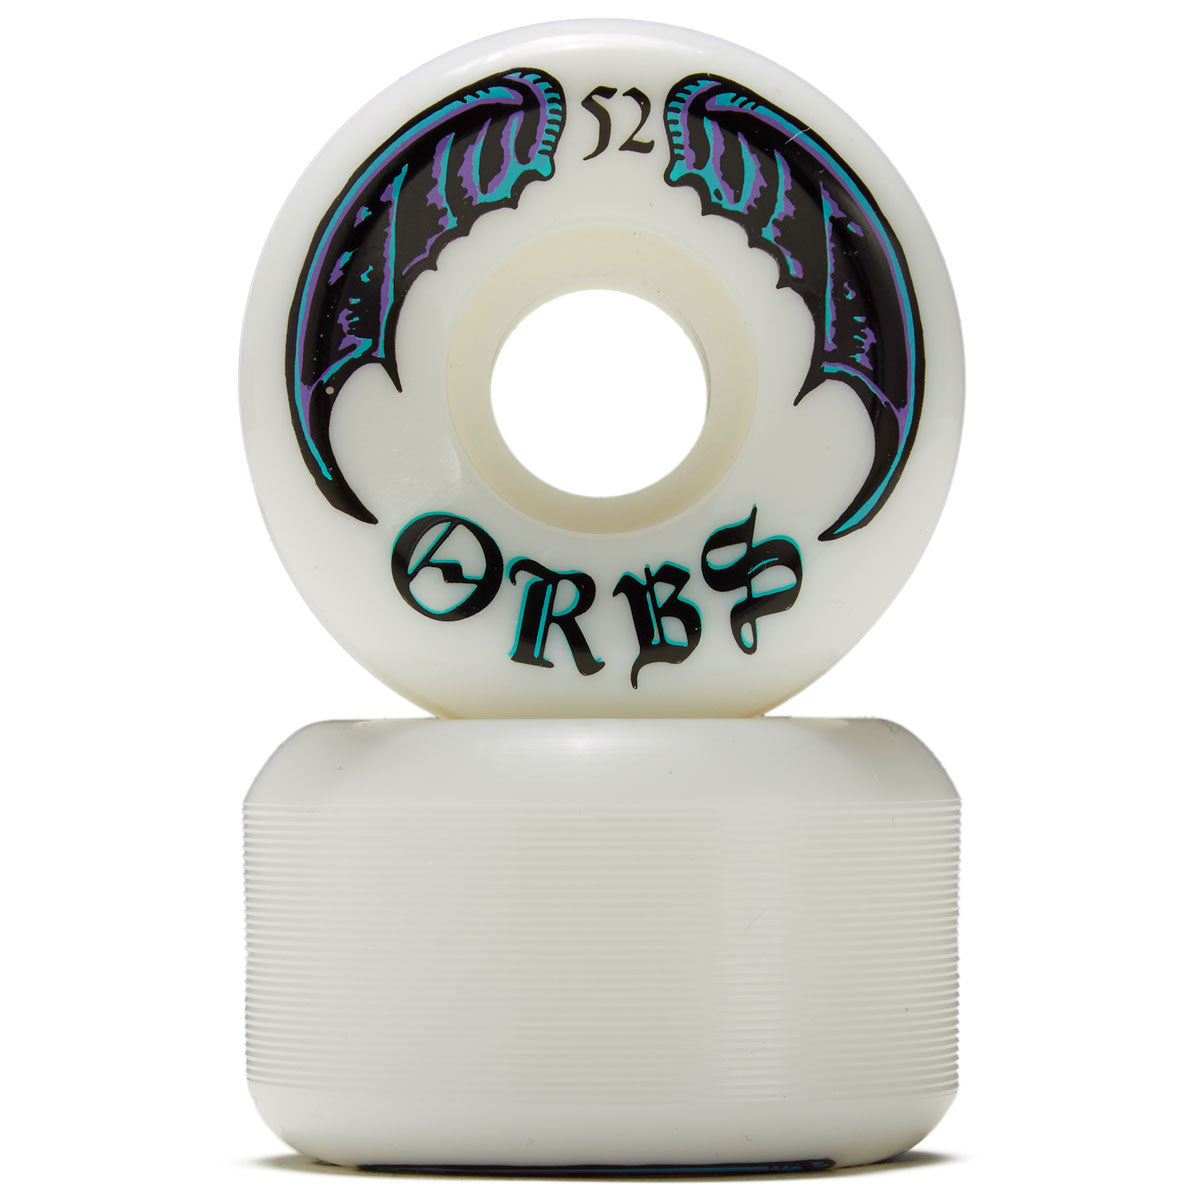 Welcome Orbs Specters Conical 99A Skateboard Wheels - White - 52mm image 2